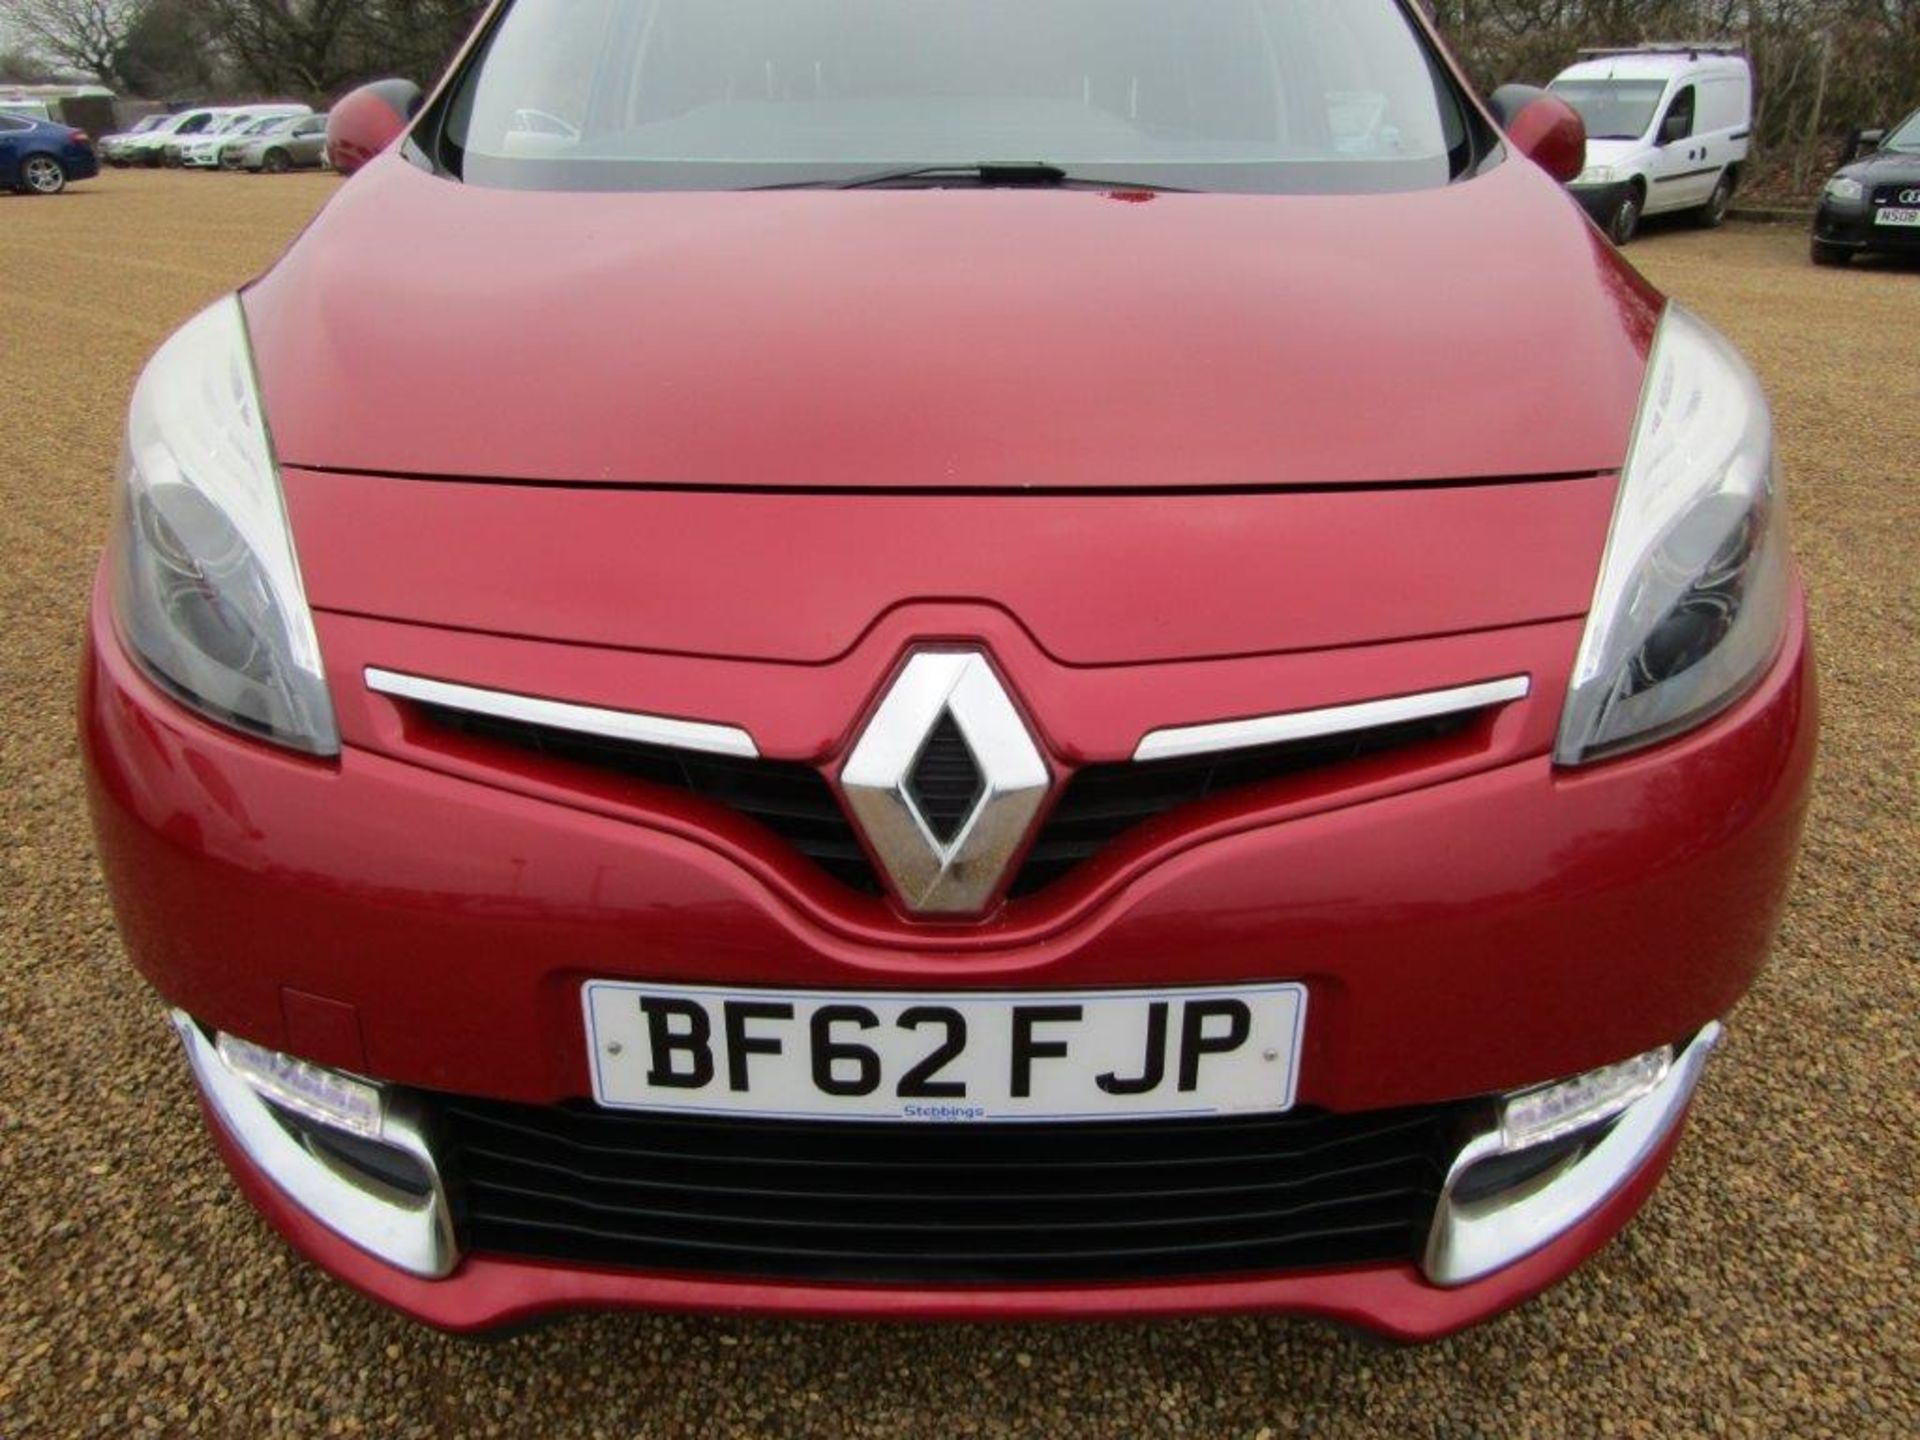 62 12 Renault GScenic D-Quettluxe - Image 3 of 23